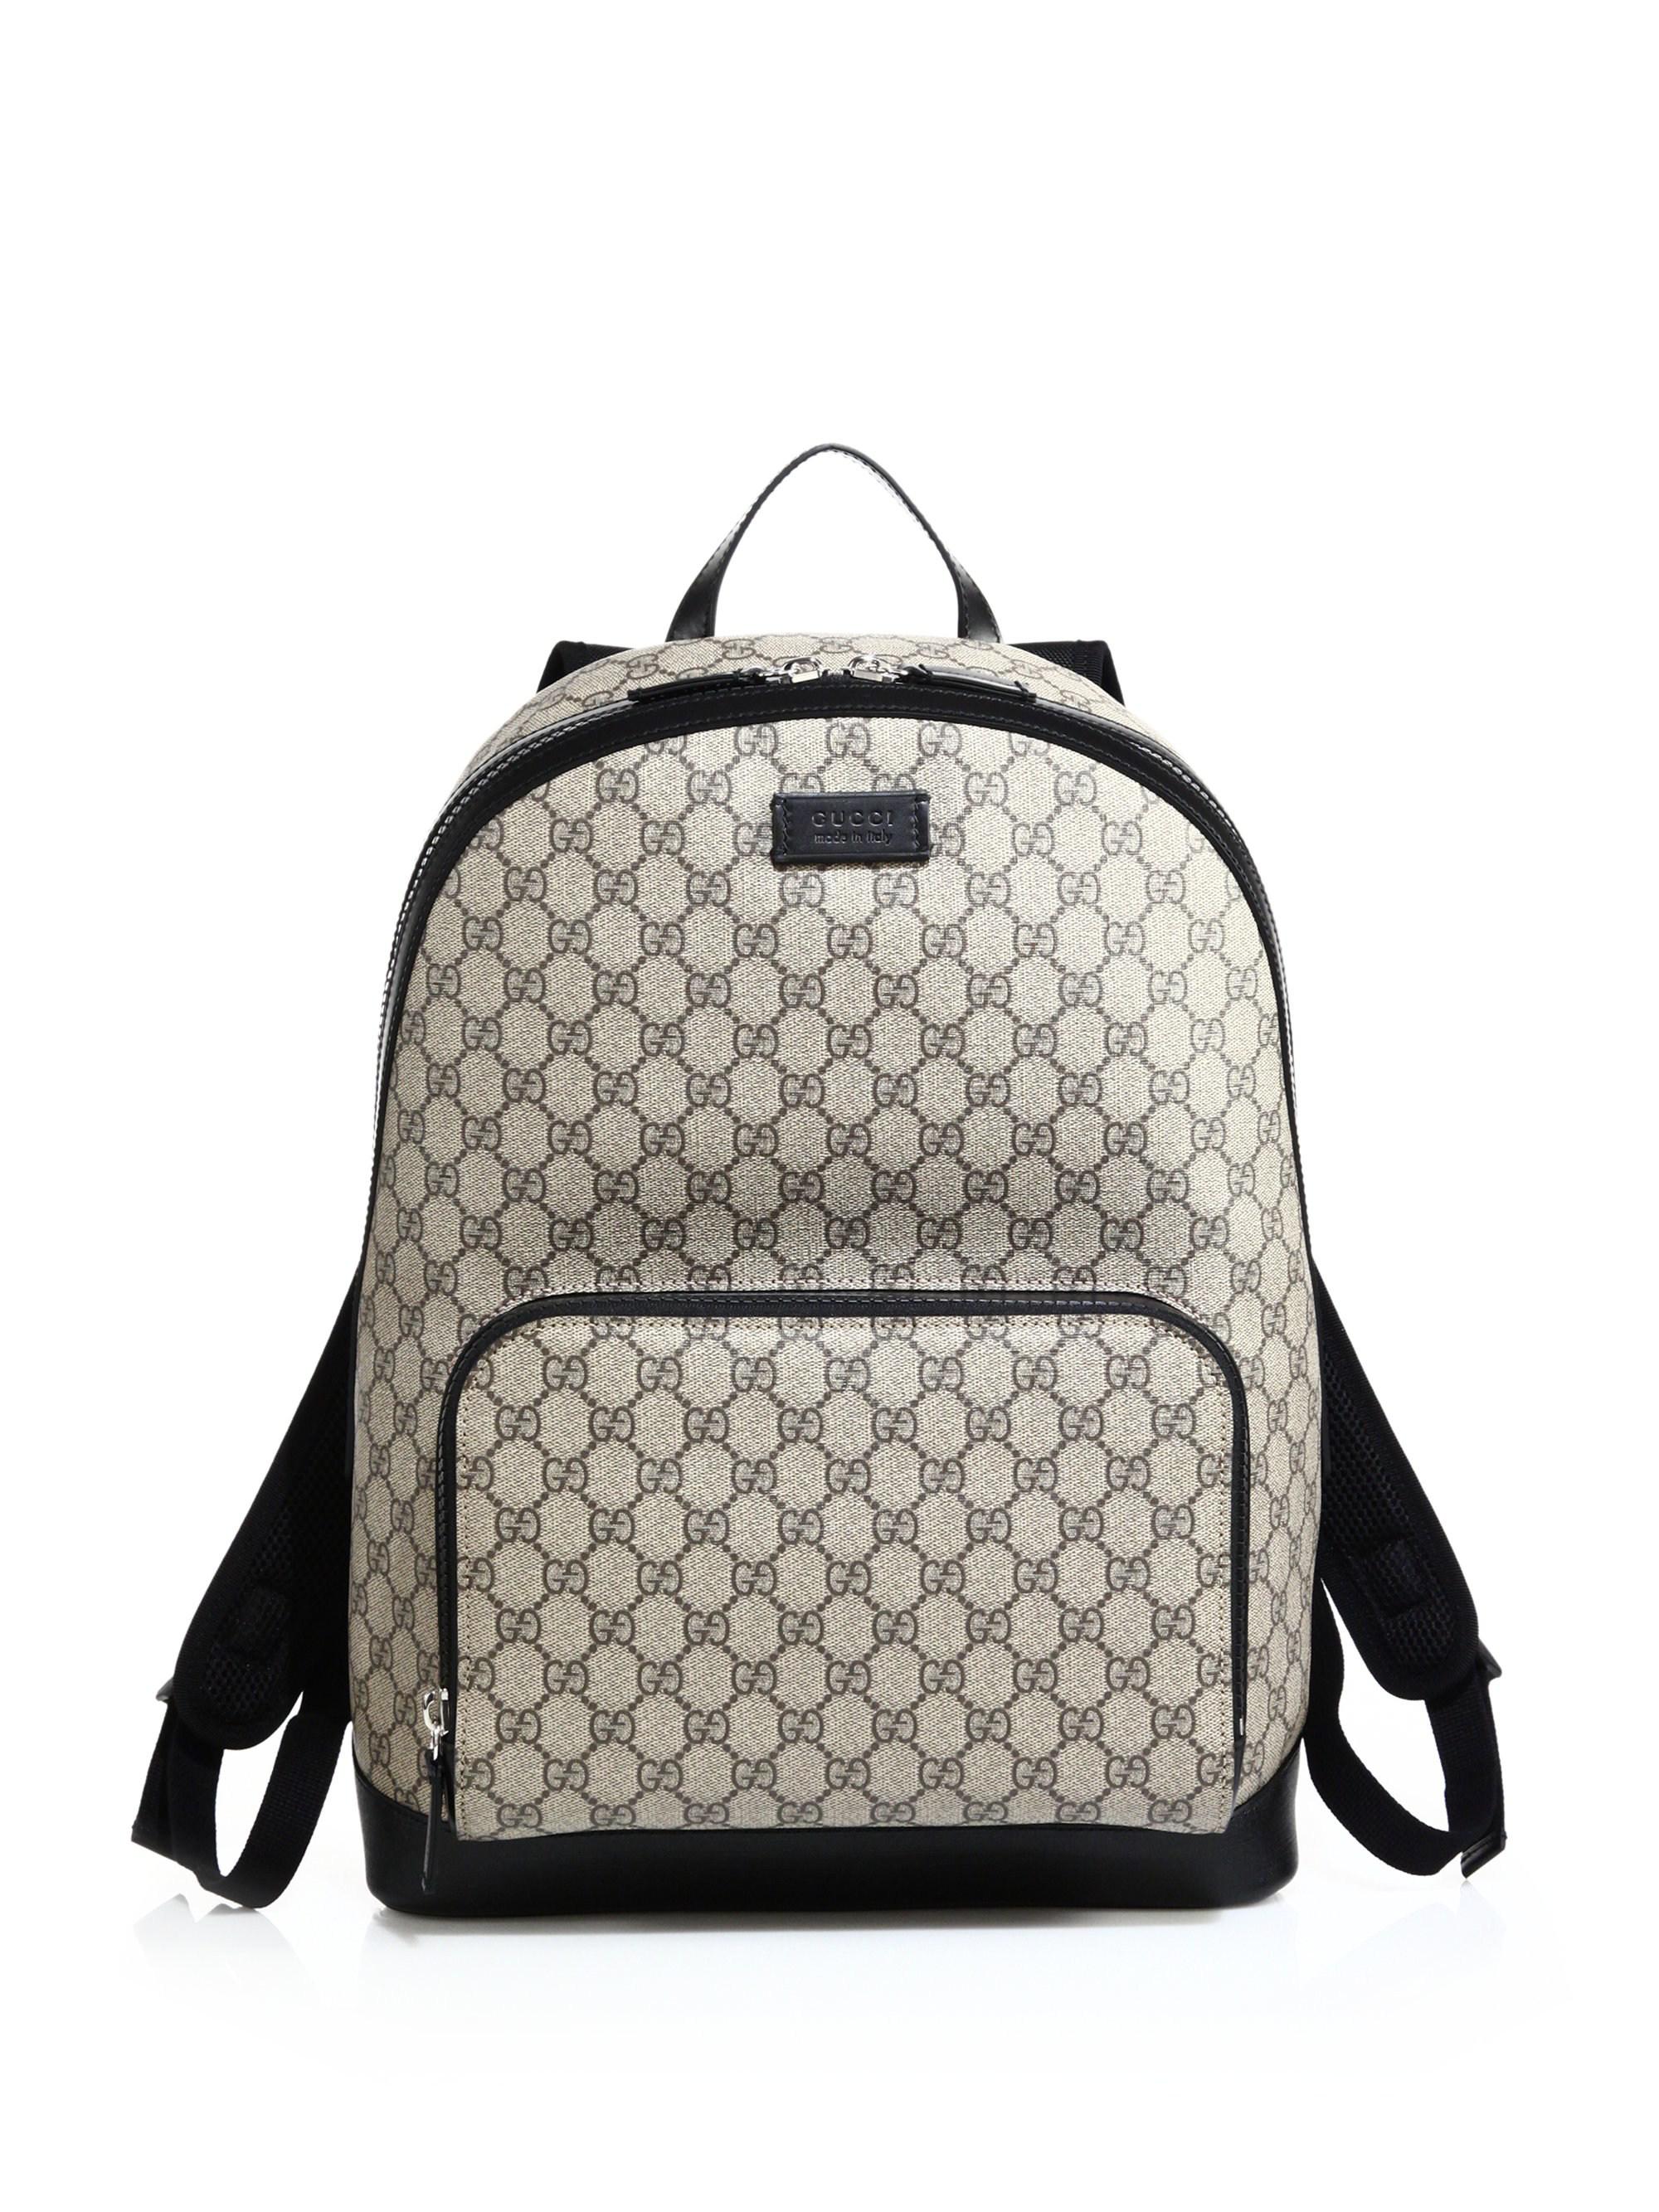 Lyst - Gucci Gg Supreme Canvas Backpack for Men